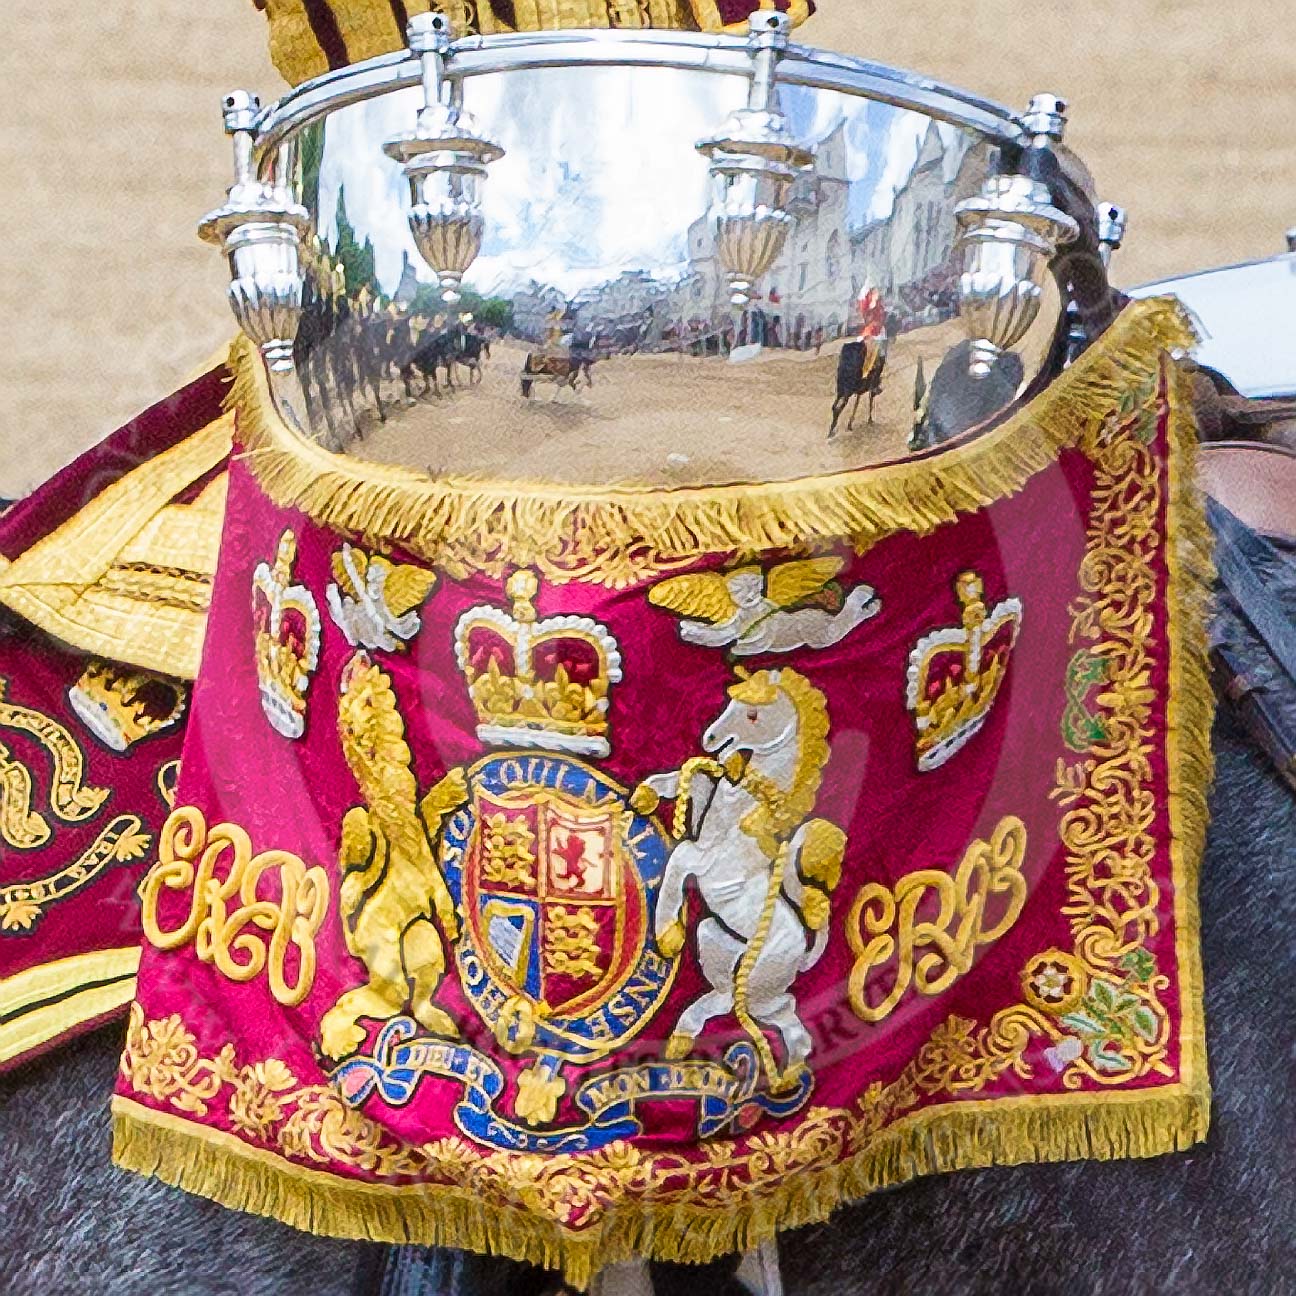 Trooping the Colour 2013: Detail view of on the kettle drums, reflecting the scene around. Image #746, 15 June 2013 12:00 Horse Guards Parade, London, UK